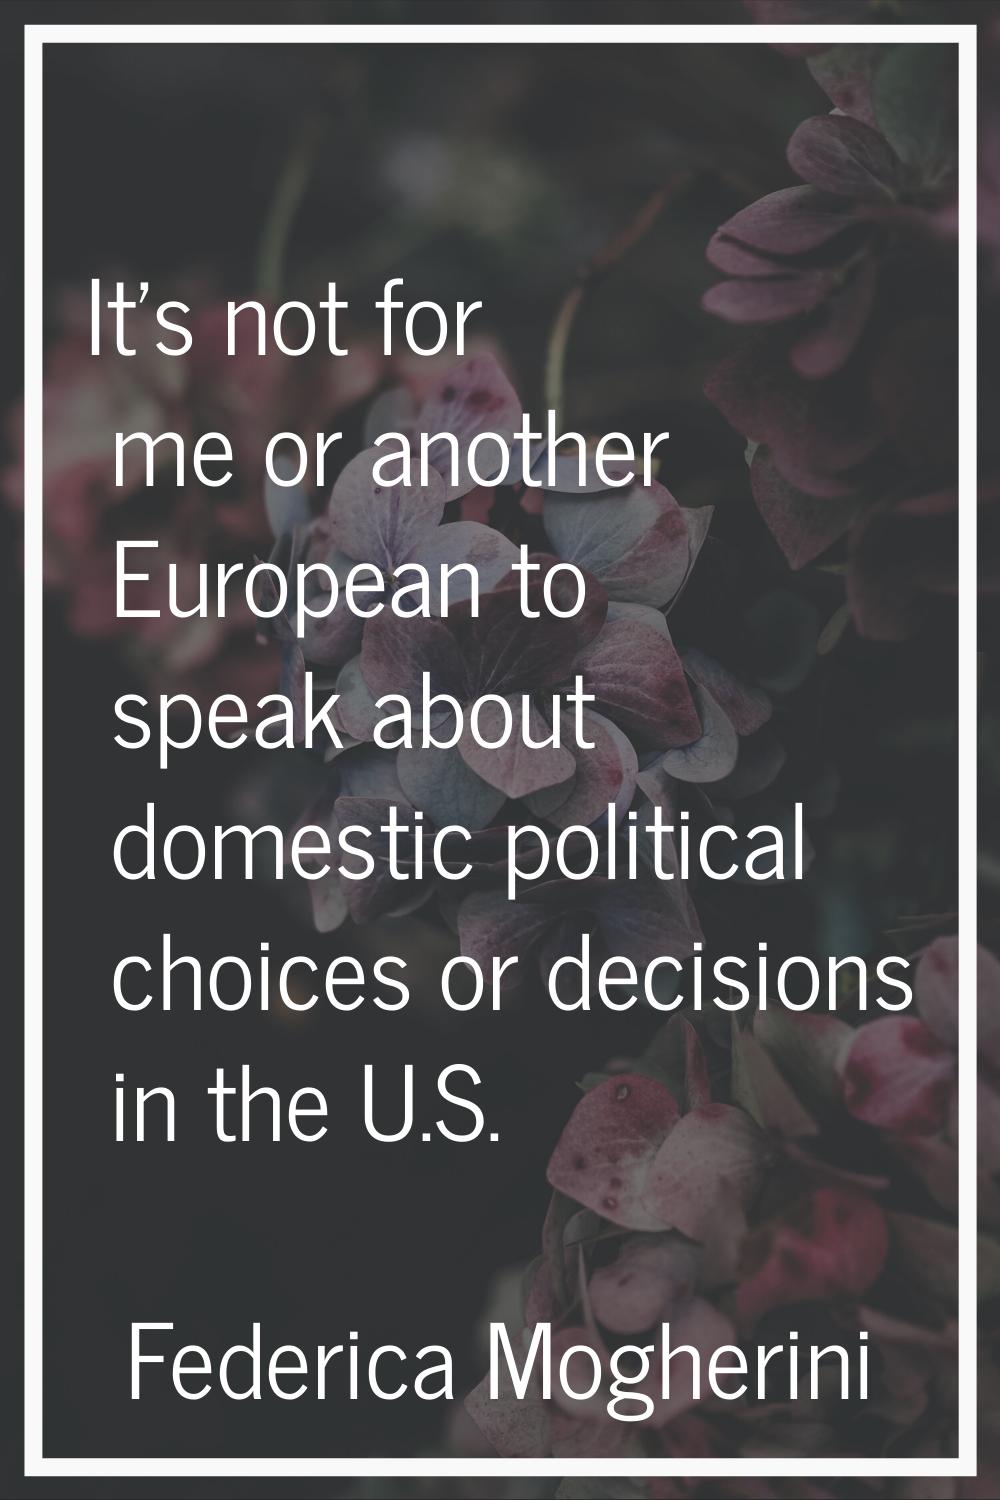 It's not for me or another European to speak about domestic political choices or decisions in the U